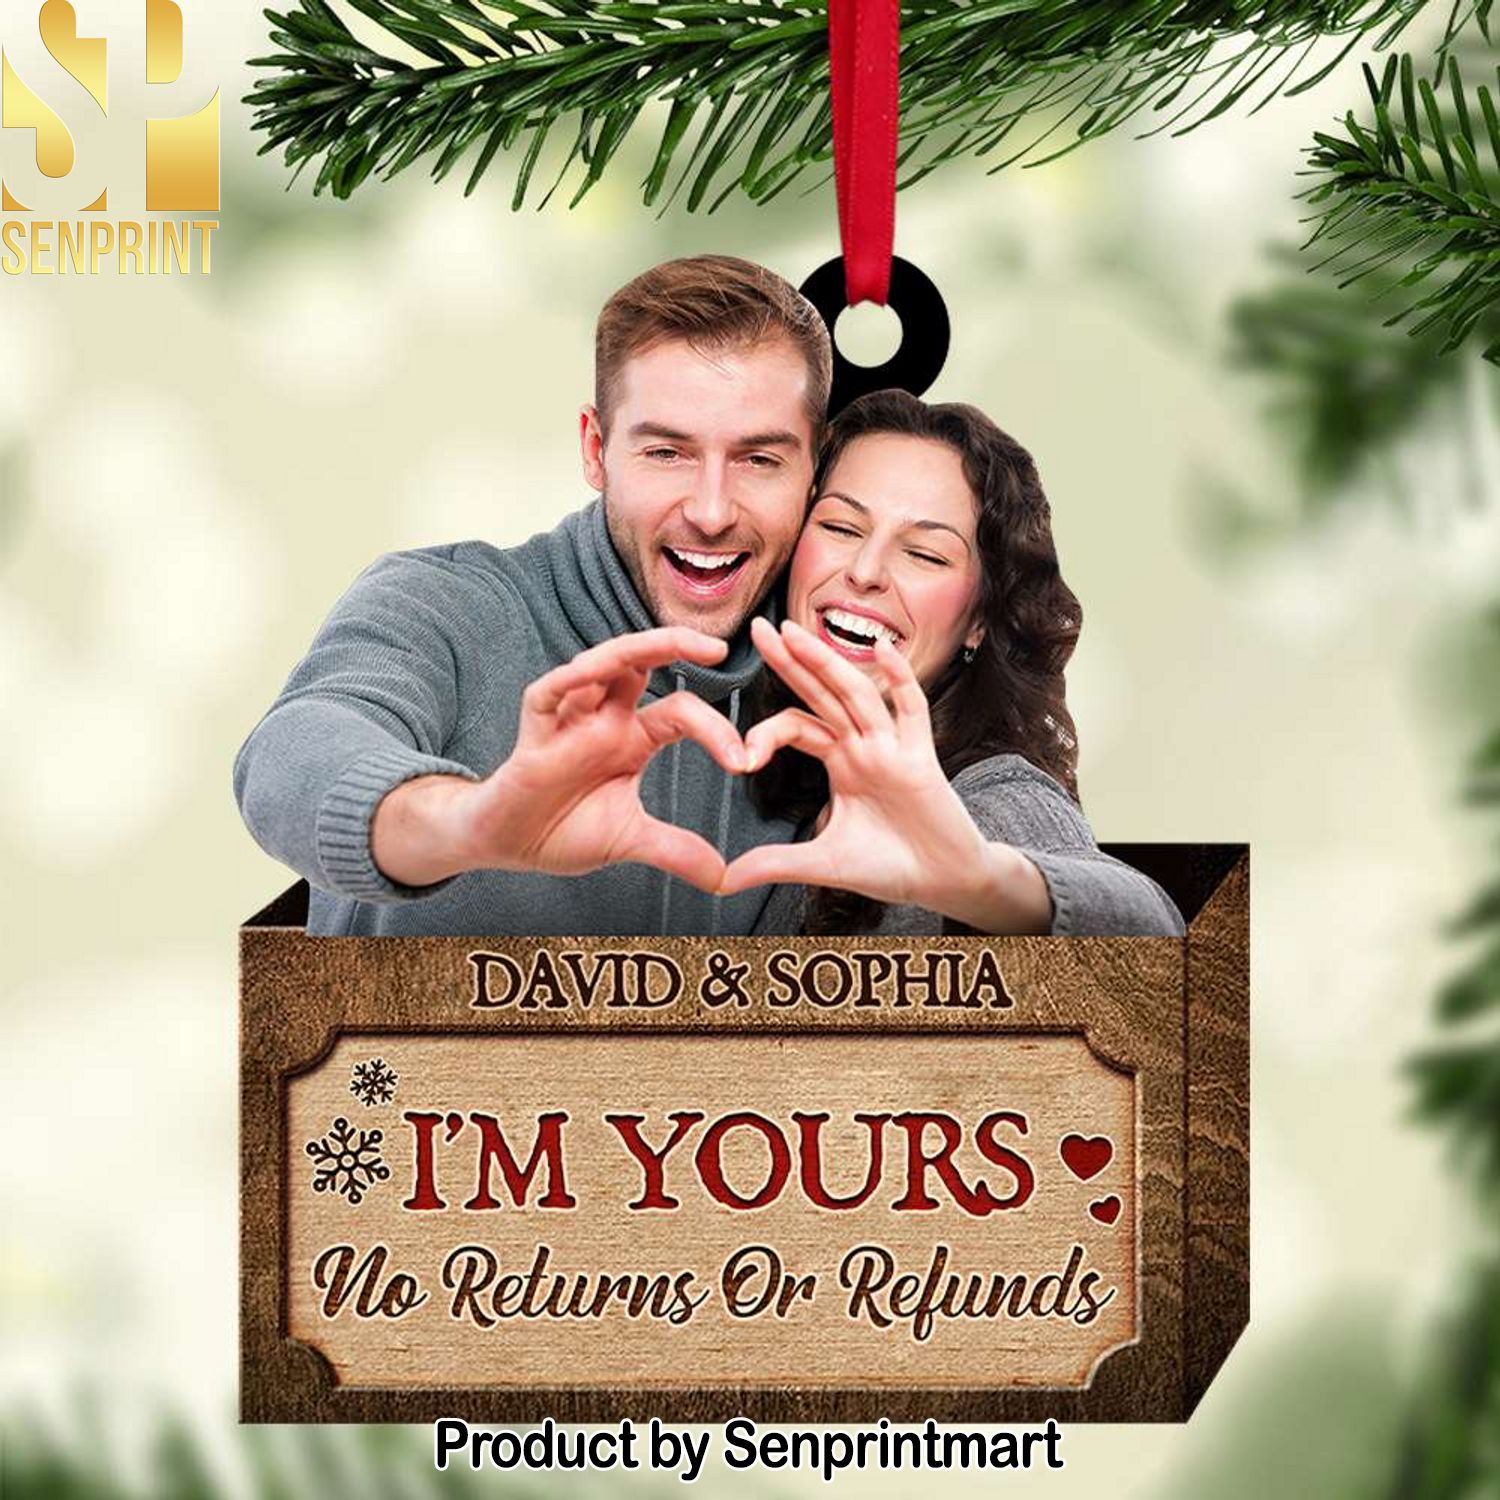 I’m Yours, No Returns Or Refunds, Couple Gift, Personalized Acrylic Ornament, Image Upload Couple Ornament, Christmas Gift